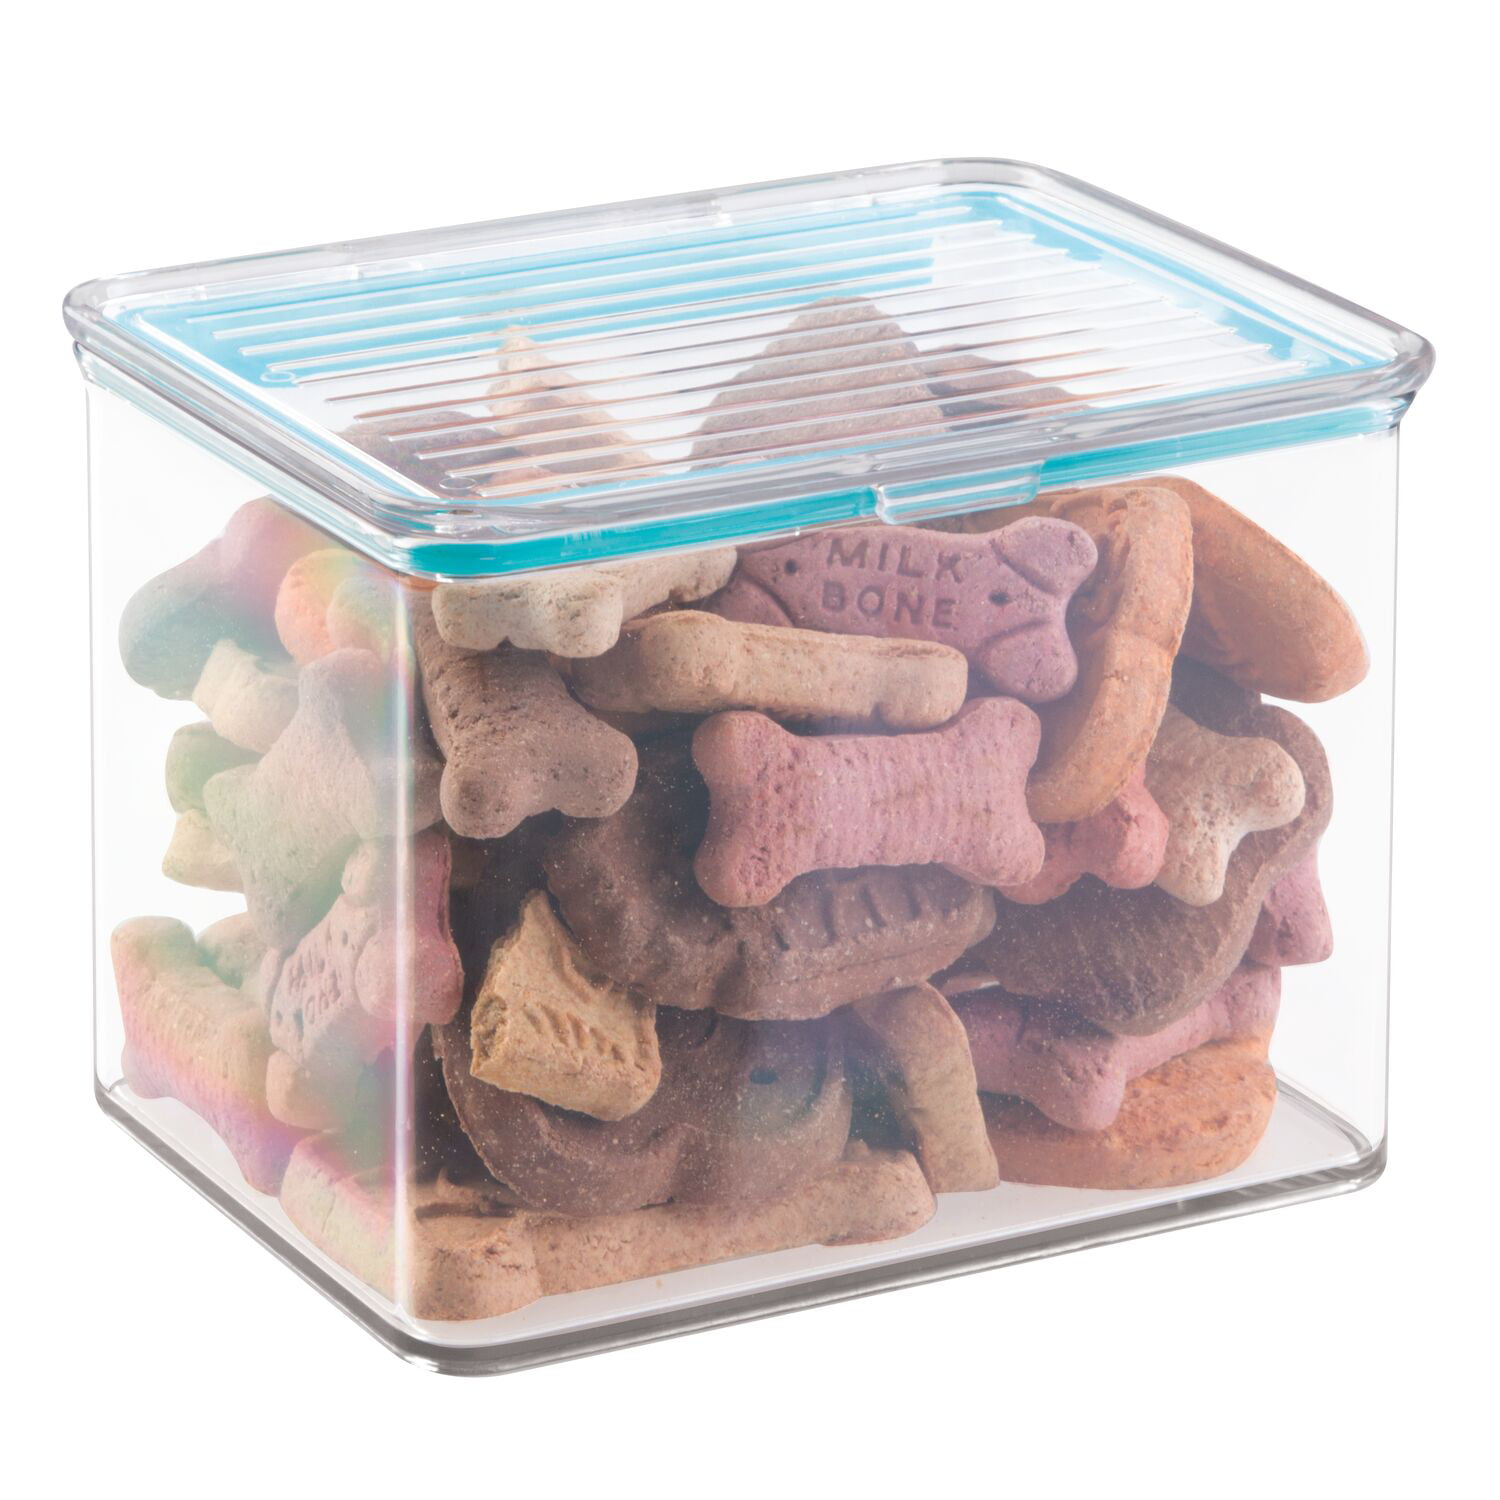 Doryh 5 L Plastic Storage Bin with Lid, Clear Transparent Box With Handles,  Set of 6